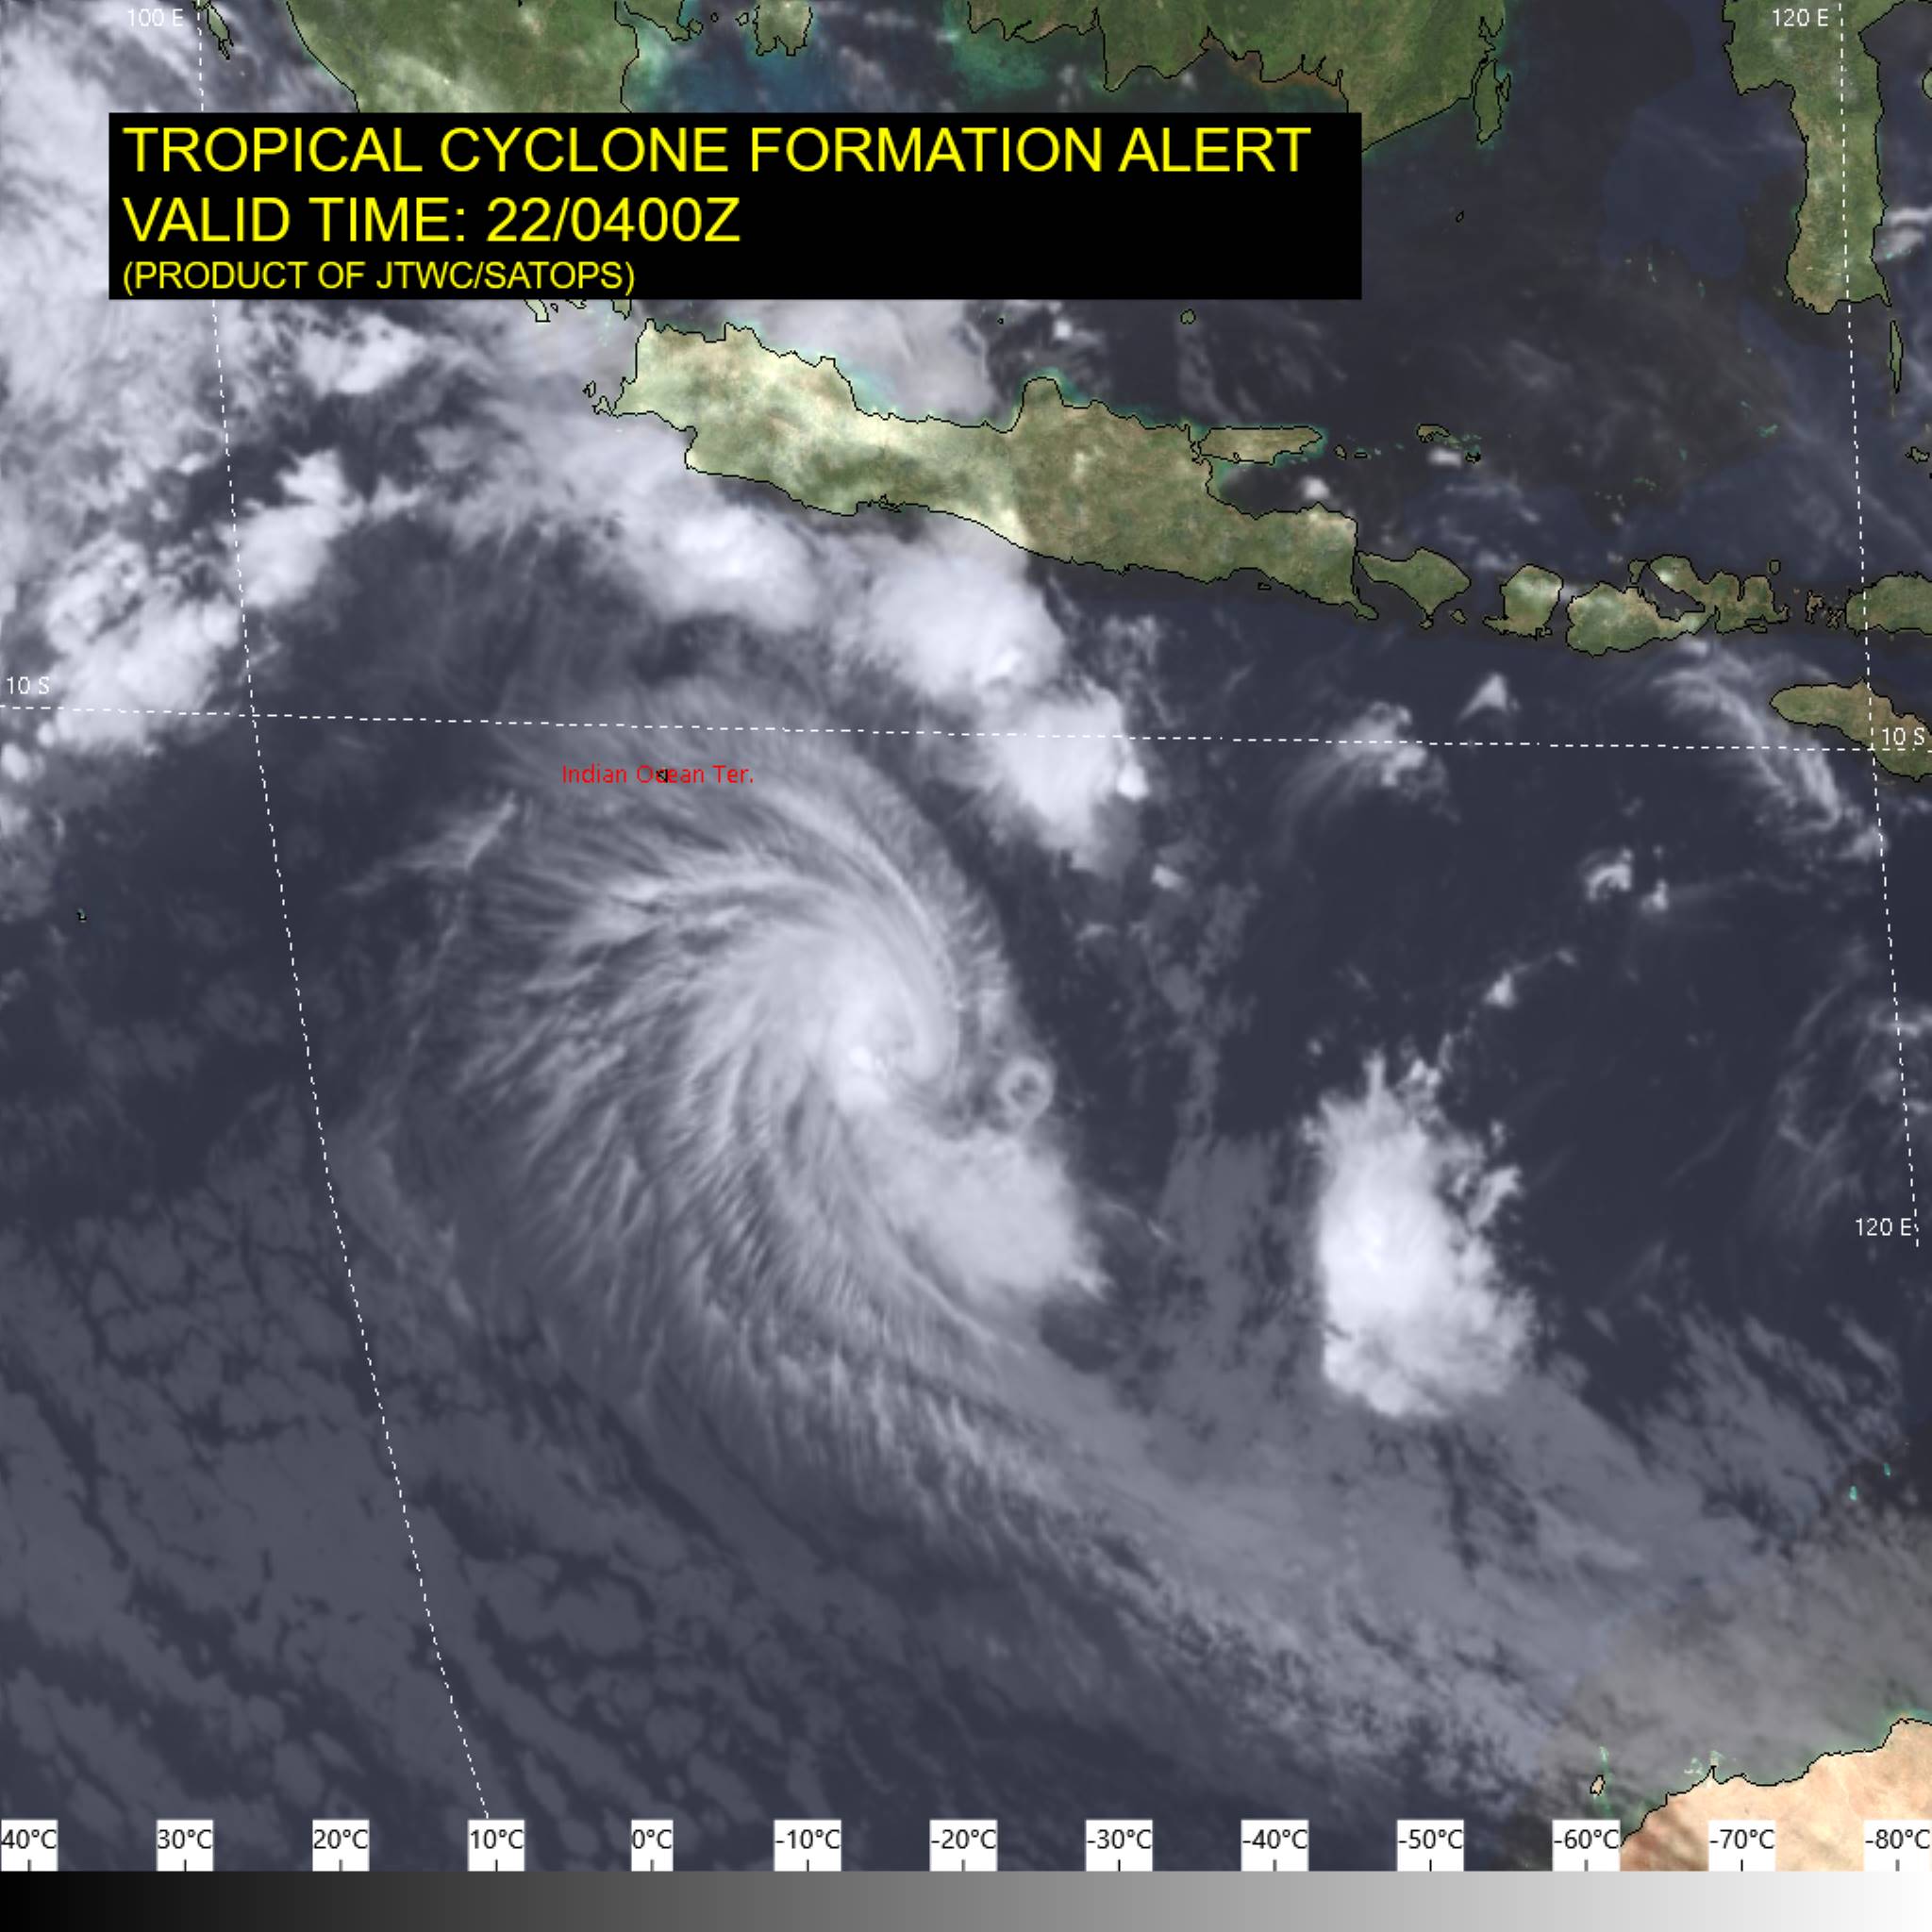 Southern Hemisphere/South Indian: Tropical Cyclone Formation Alert issued for Invest 90S(PADDY), 22/04utc